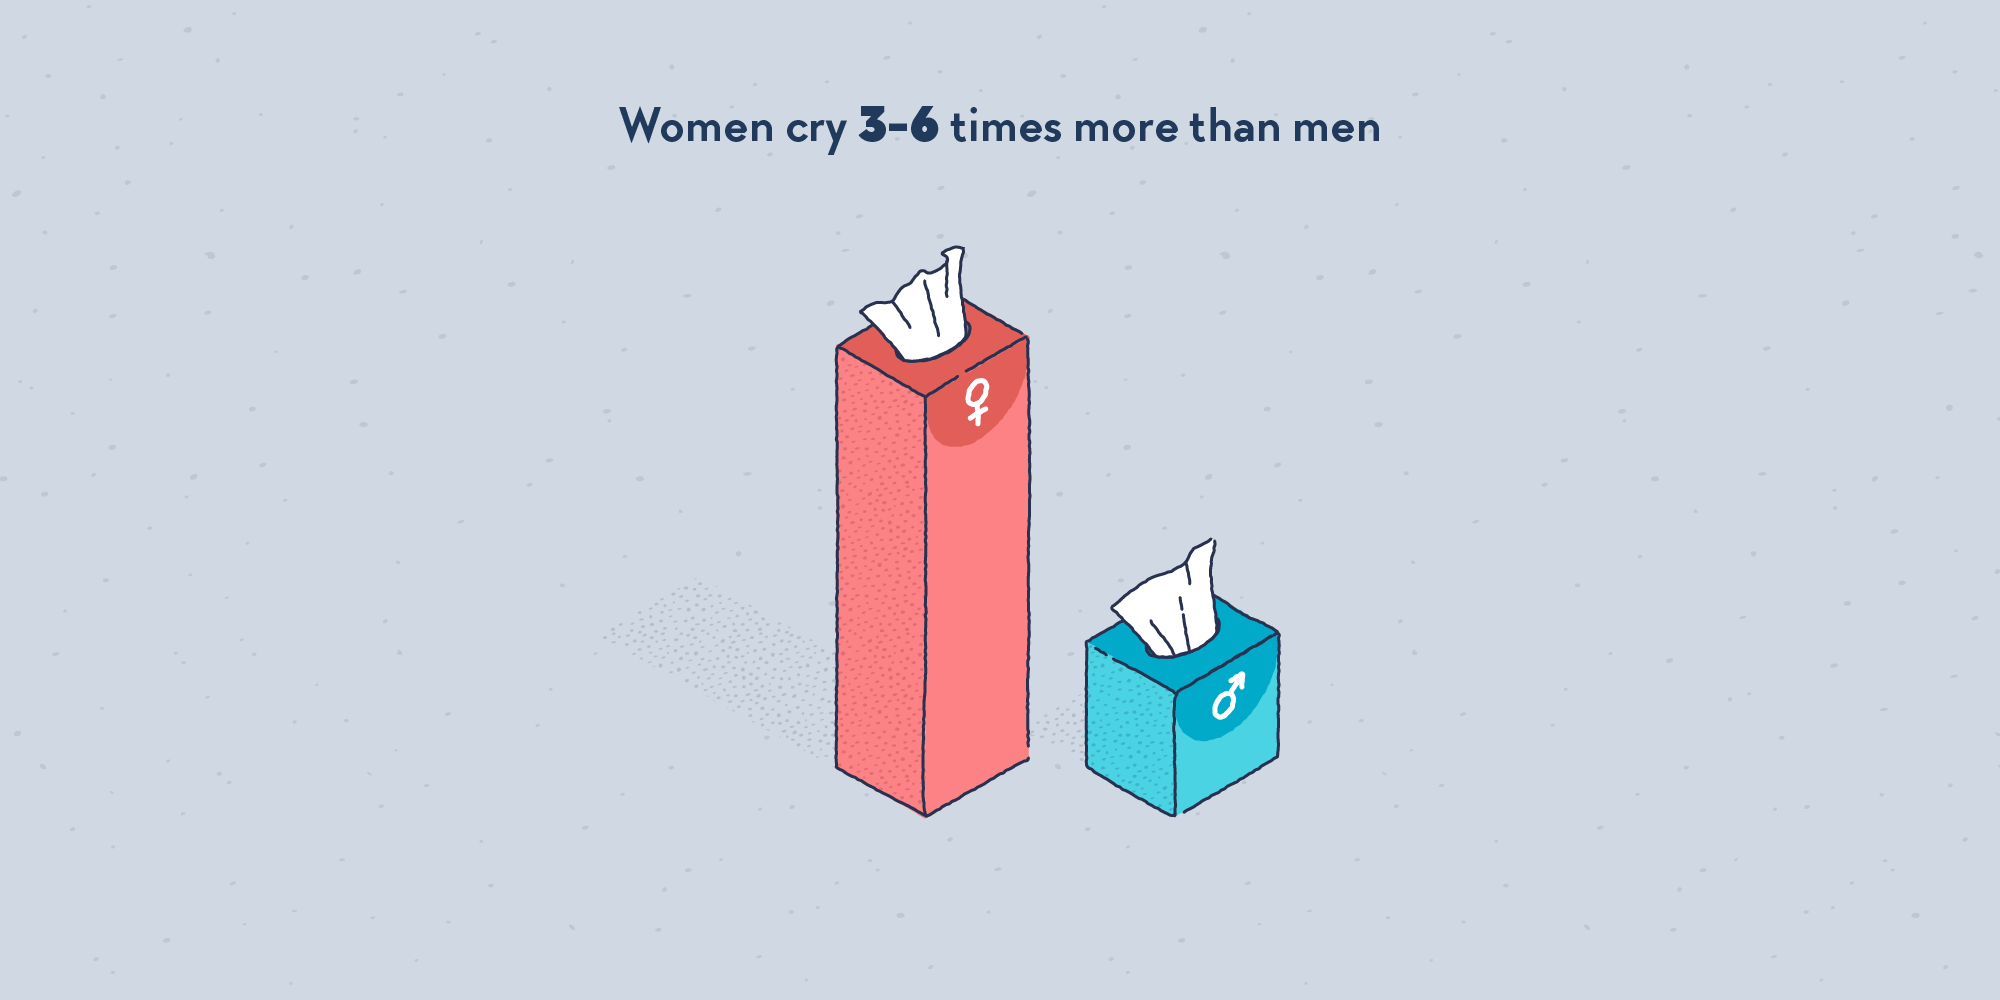 Two boxes of paper tissues, each marked of a gender symbol. The one for women is far taller than the one for men.